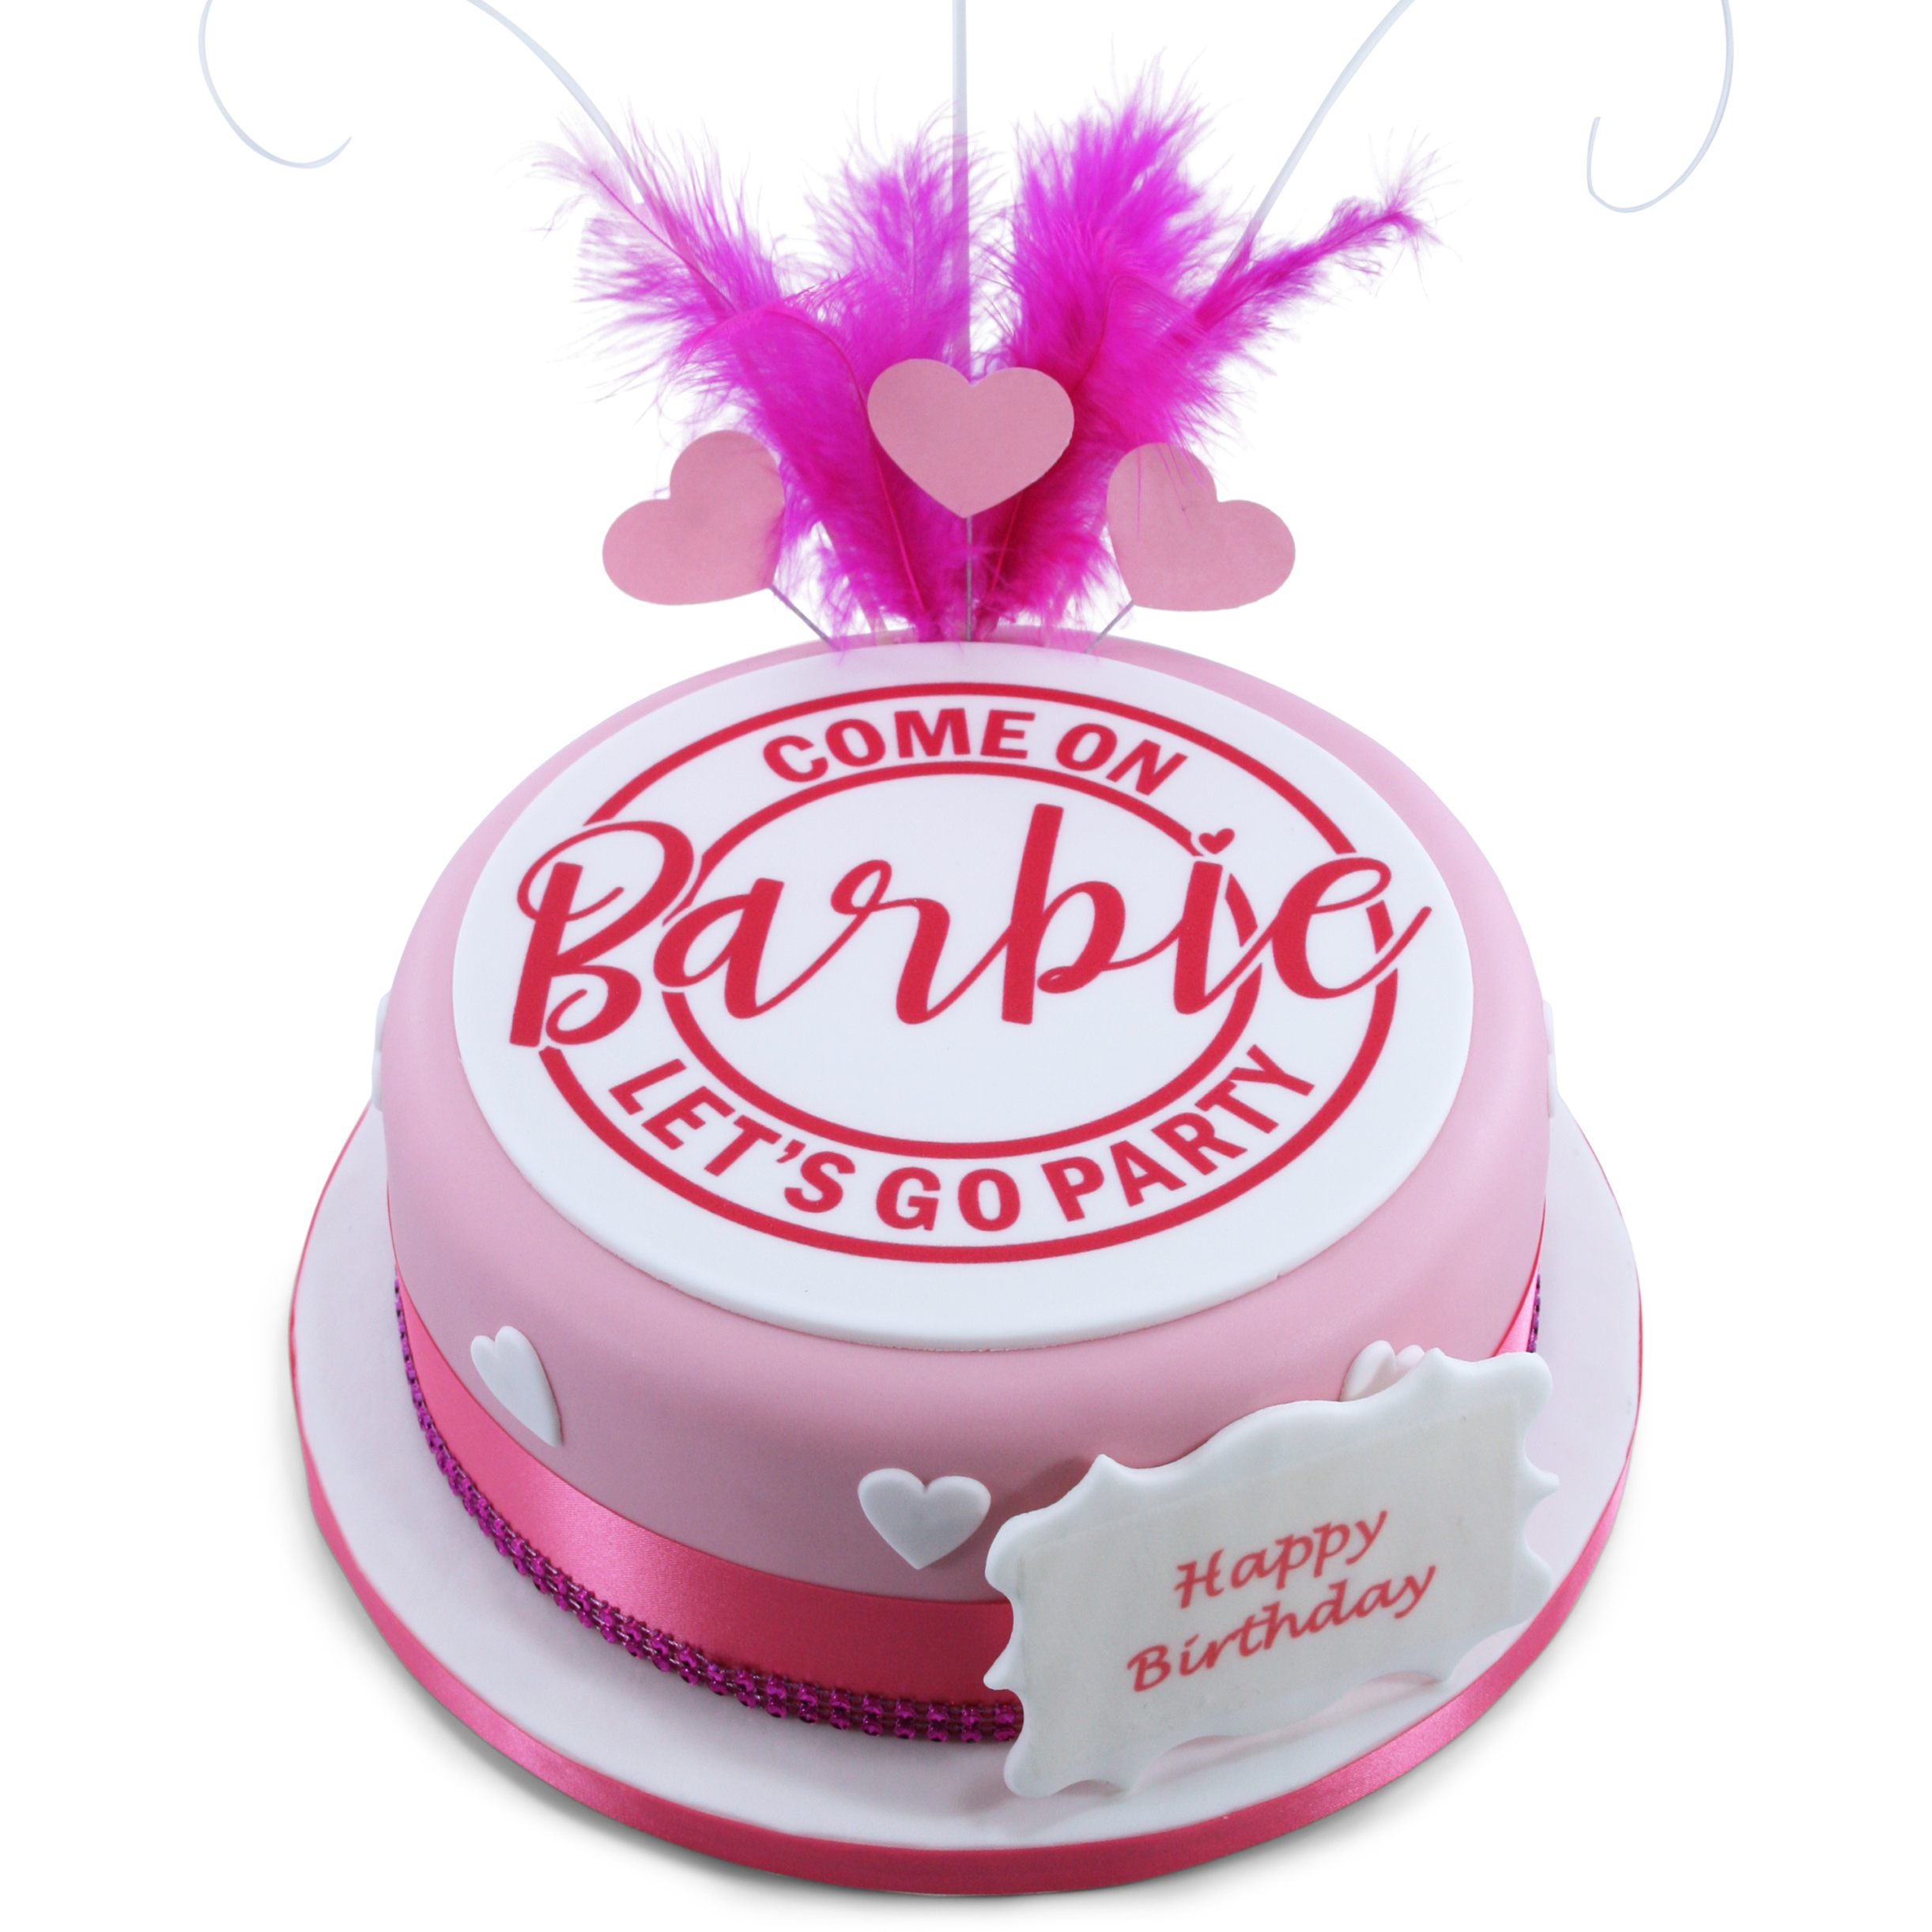 Red & White Barbie Doll Cake | Best Barbie Doll Cakes | CakeBee